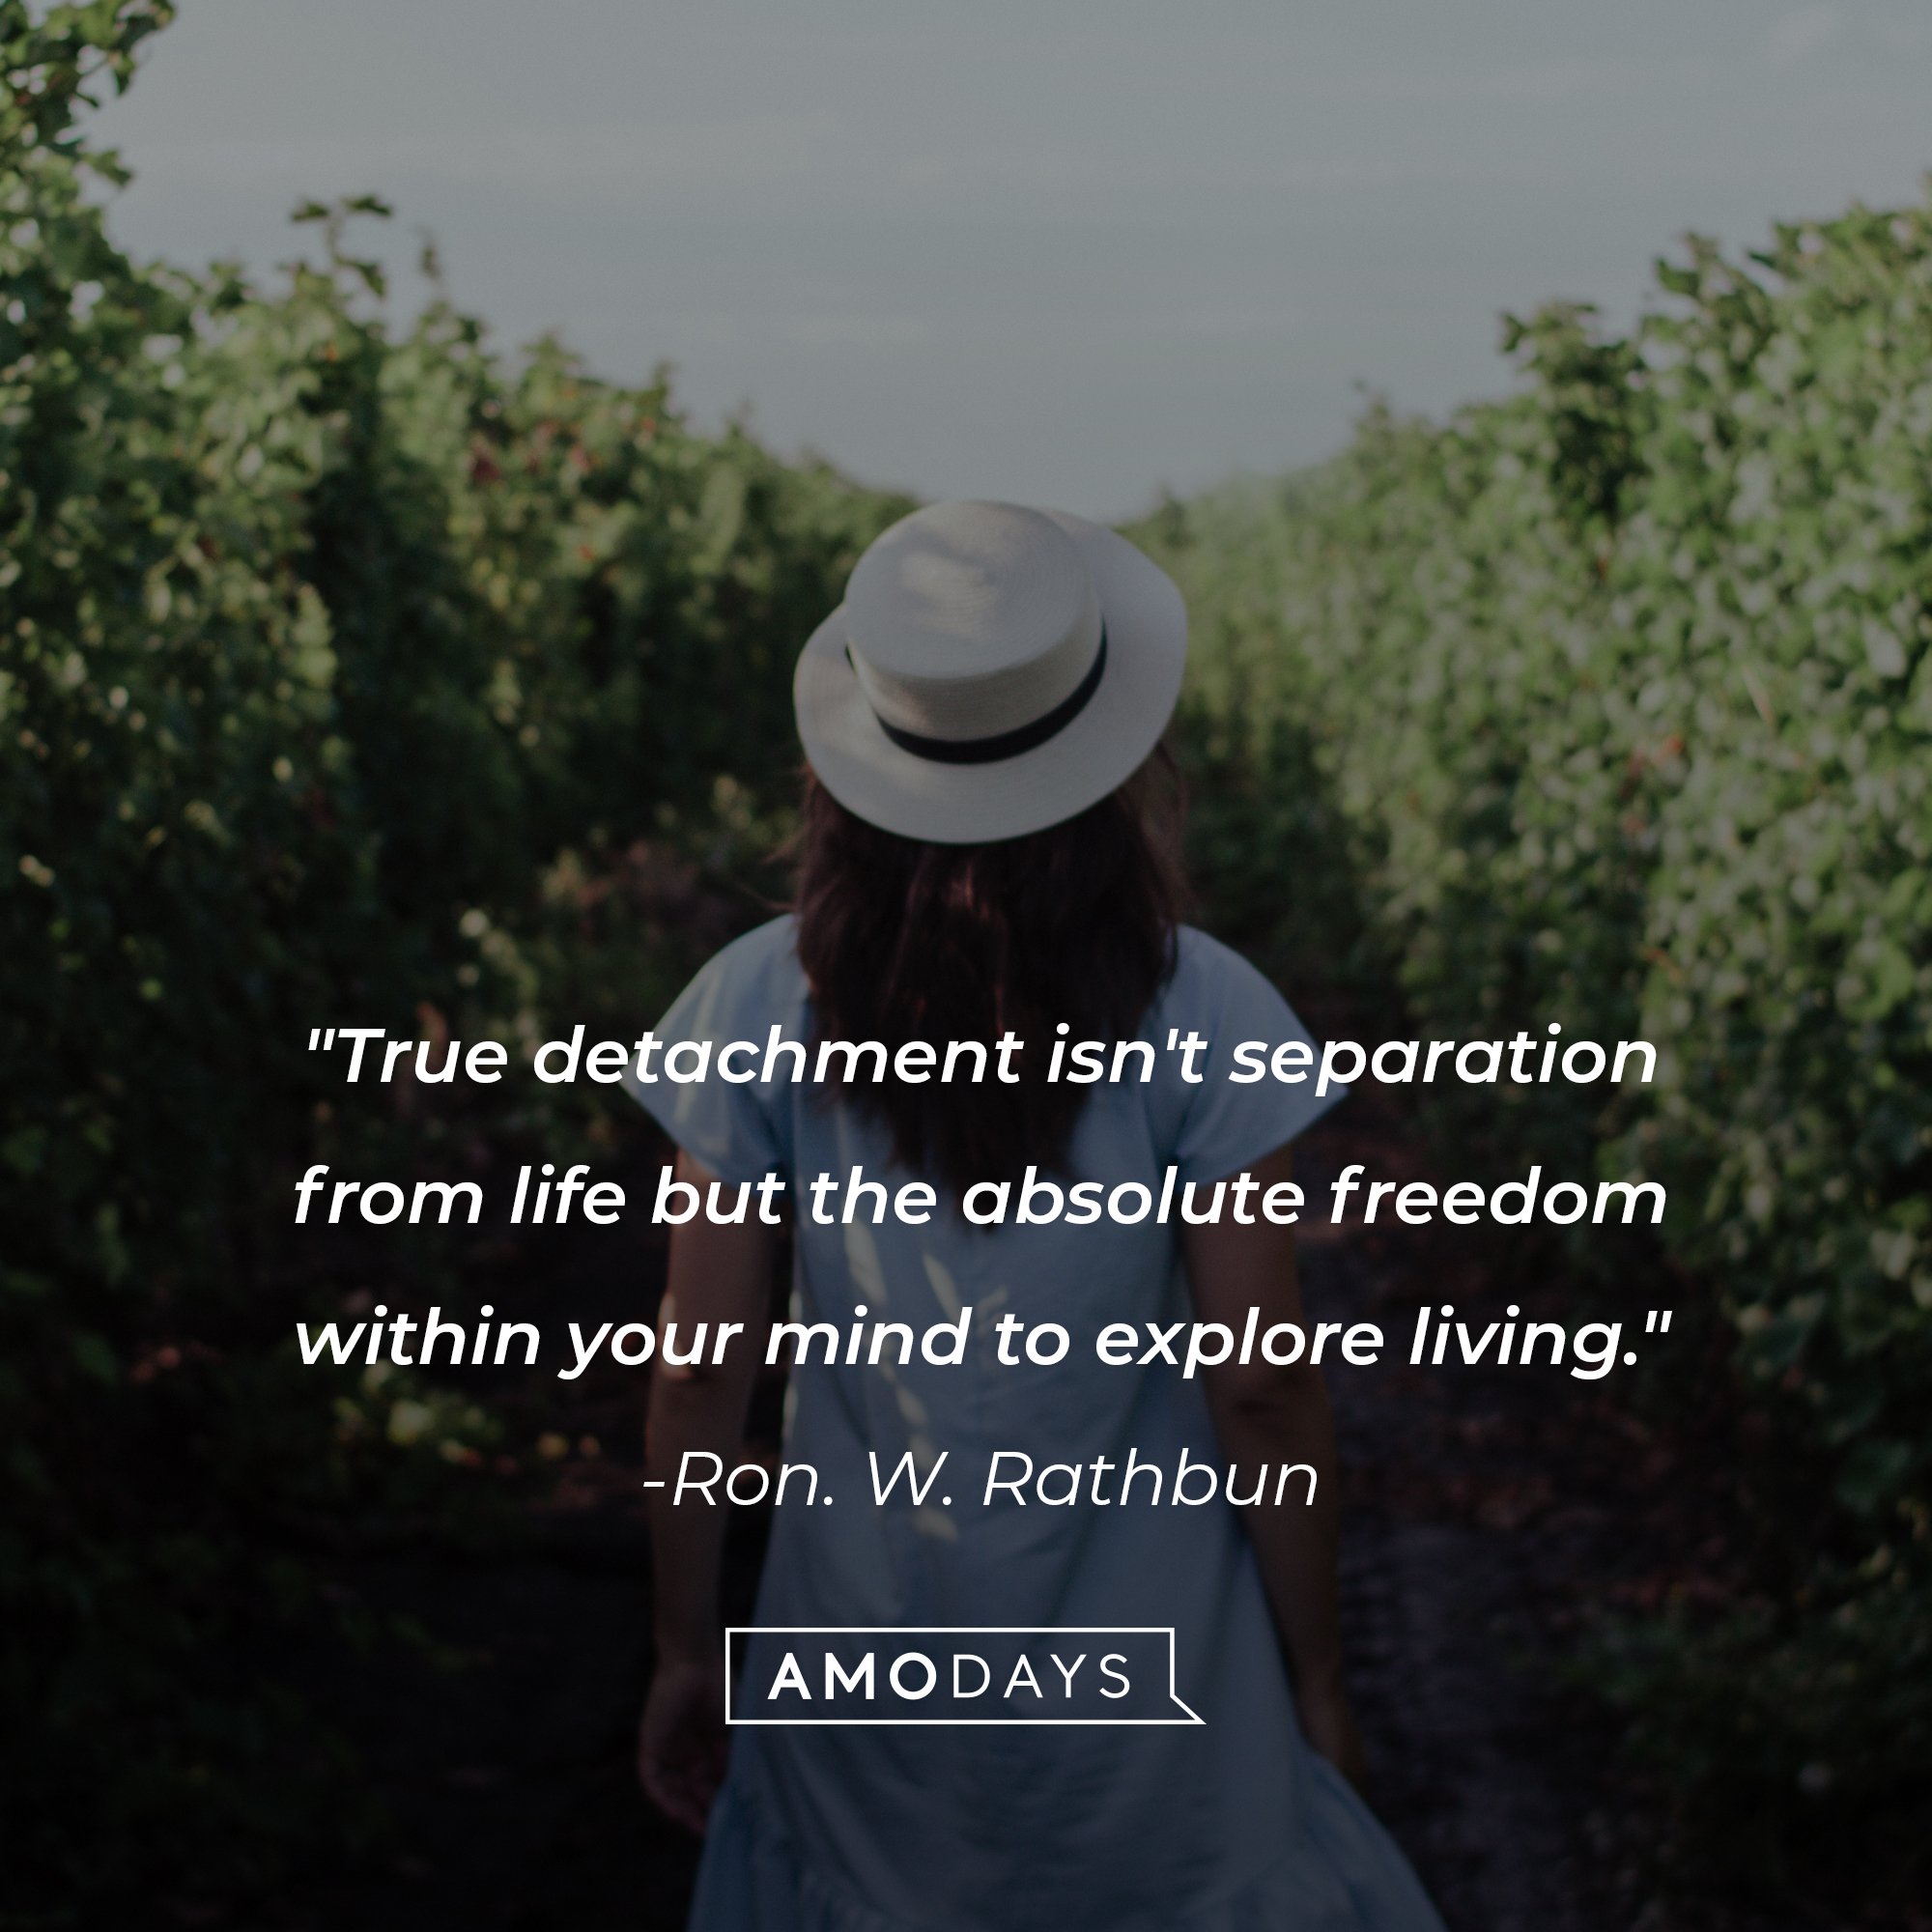 Ron. W. Rathbun's quote: "True detachment isn't separation from life but the absolute freedom within your mind to explore living." | Image: AmoDays